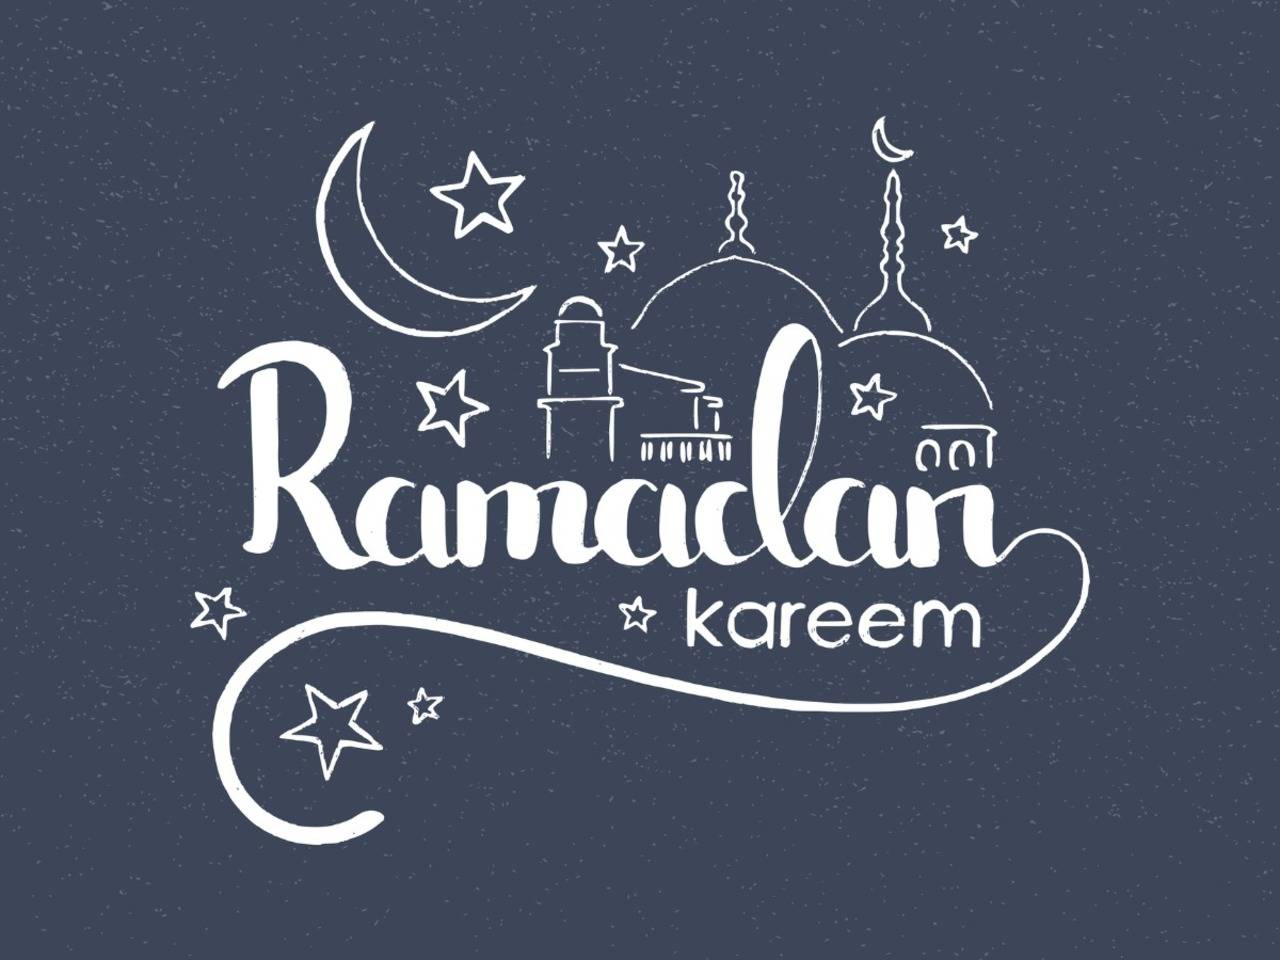 Collection of 999+ Incredible Ramadan Mubarak Images in Full 4K Quality